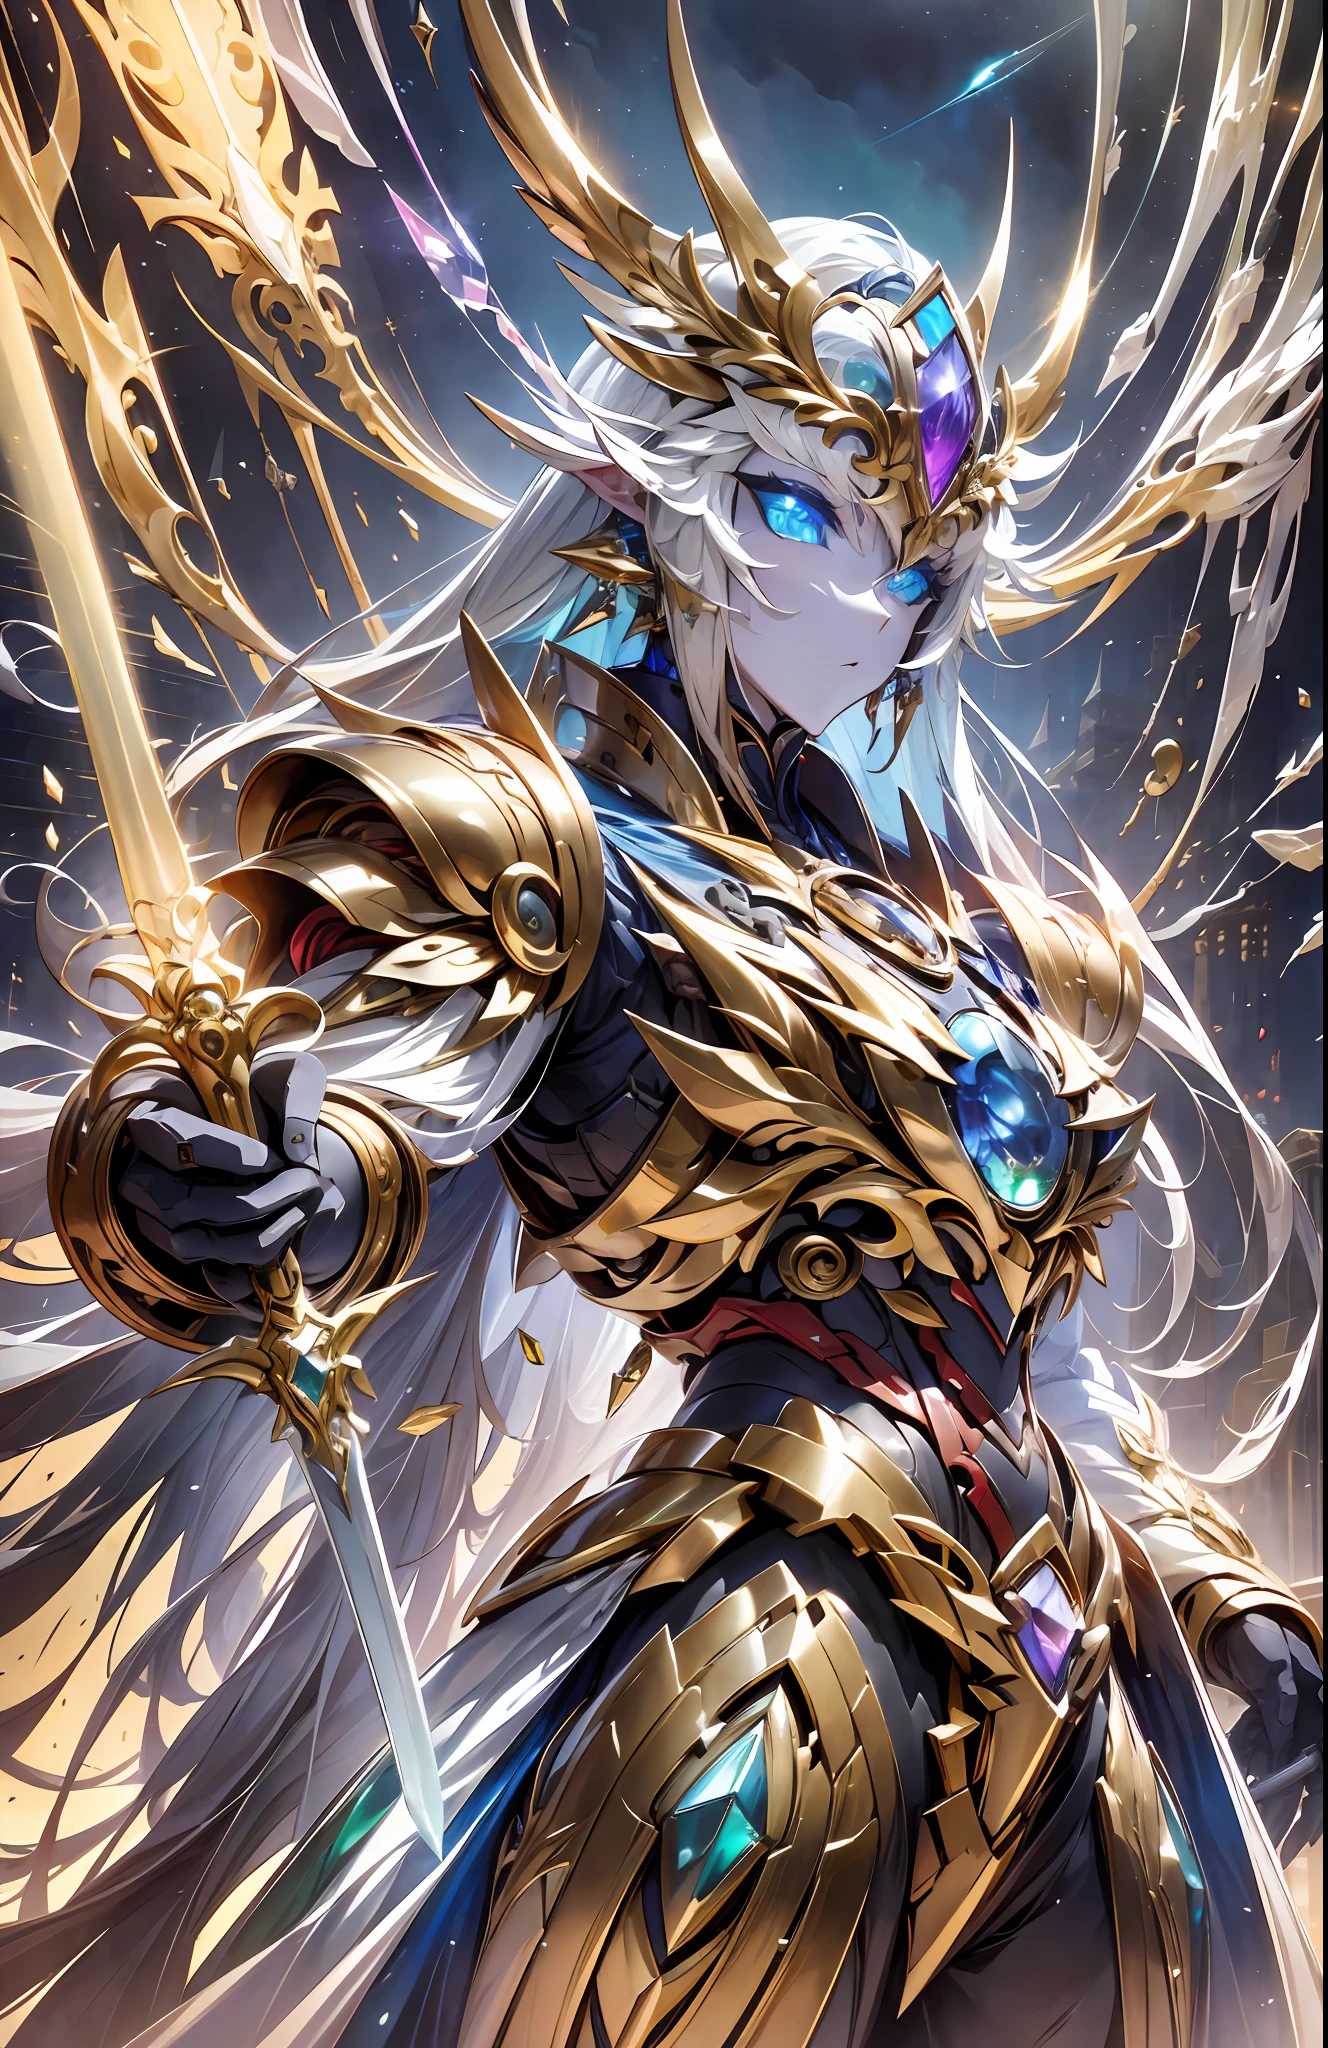 (Very long sword:1.5),The ultimate king of the universe,Ancient legends,Chinese Taoism,mysterious symbols,Ethereal lights,surrounded by cloud,Fighting posture,(Smooth surface),Stand on a cliff overlooking the night view,Cyberpunk-city,White is the main color，With red、Bright decorative colors such as blue and gold。(crystal:1.3),(((Masterpiece))),(((Best quality))),((ultra -detailed))((Extremely detailed CG)),((16K resolution))((An extremely delicate and beautiful)),{Photorealistic},Full of detailed light blooms,A masterpiece from the Canon EOS R6 shooting,((nmasterpiece)) ,cinematiclight,solo,Unreal Engine 5,(Long sword in hand:1.4),Chinese Longquan sword,Superb craftsmanship、An elegant and powerful sword。The blade is slender and graceful),lightening,raiden